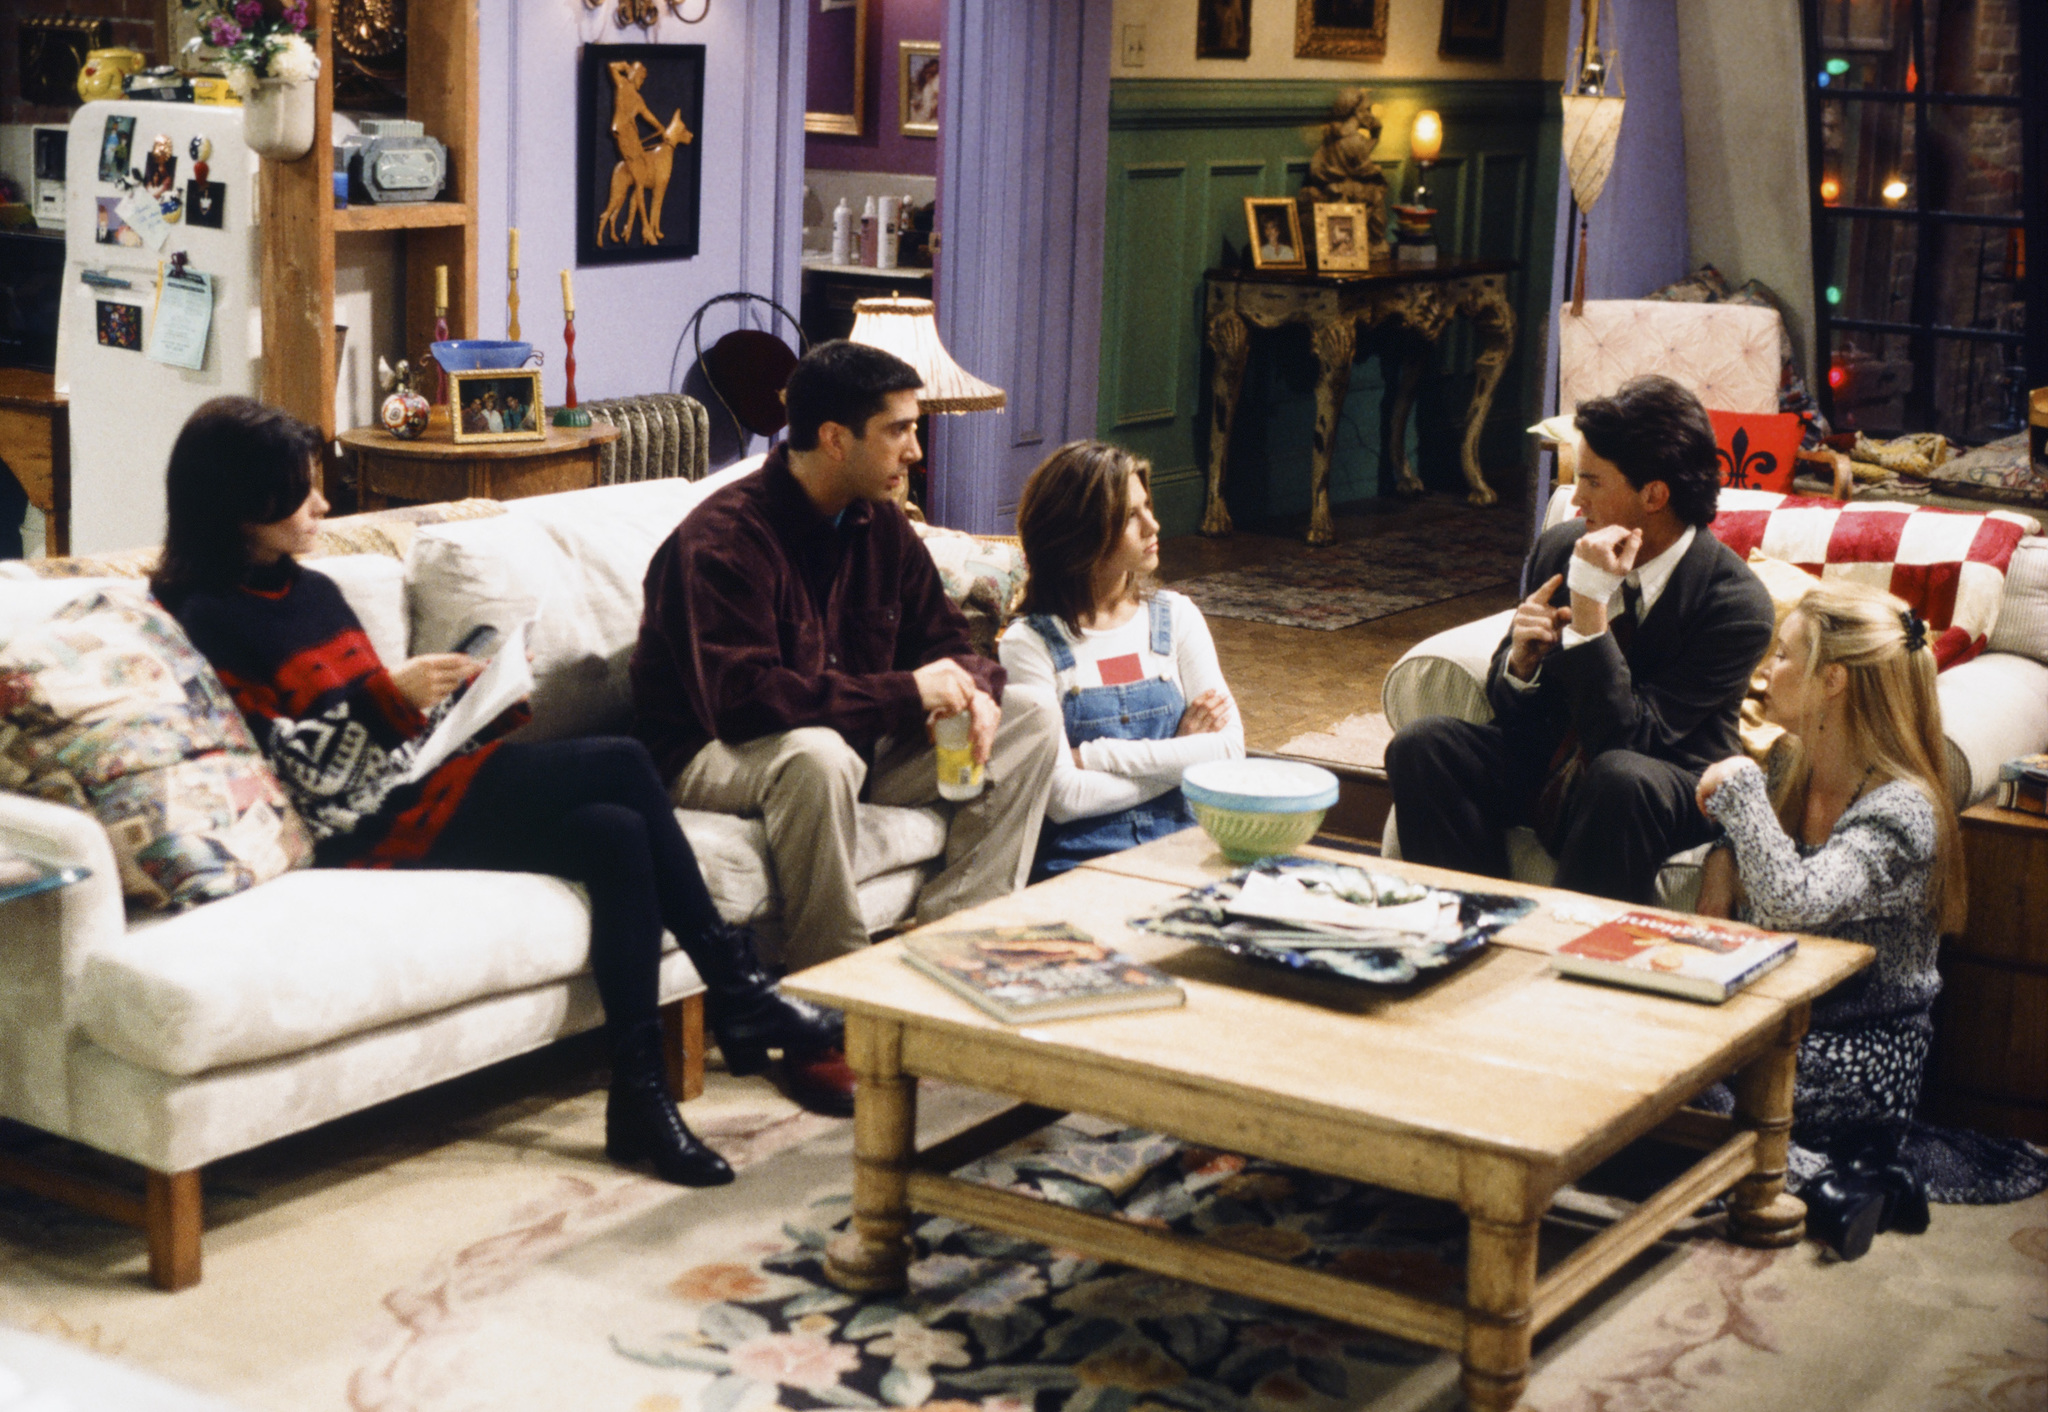 You Can Now Stay At The 'Friends' New York City Apartment For